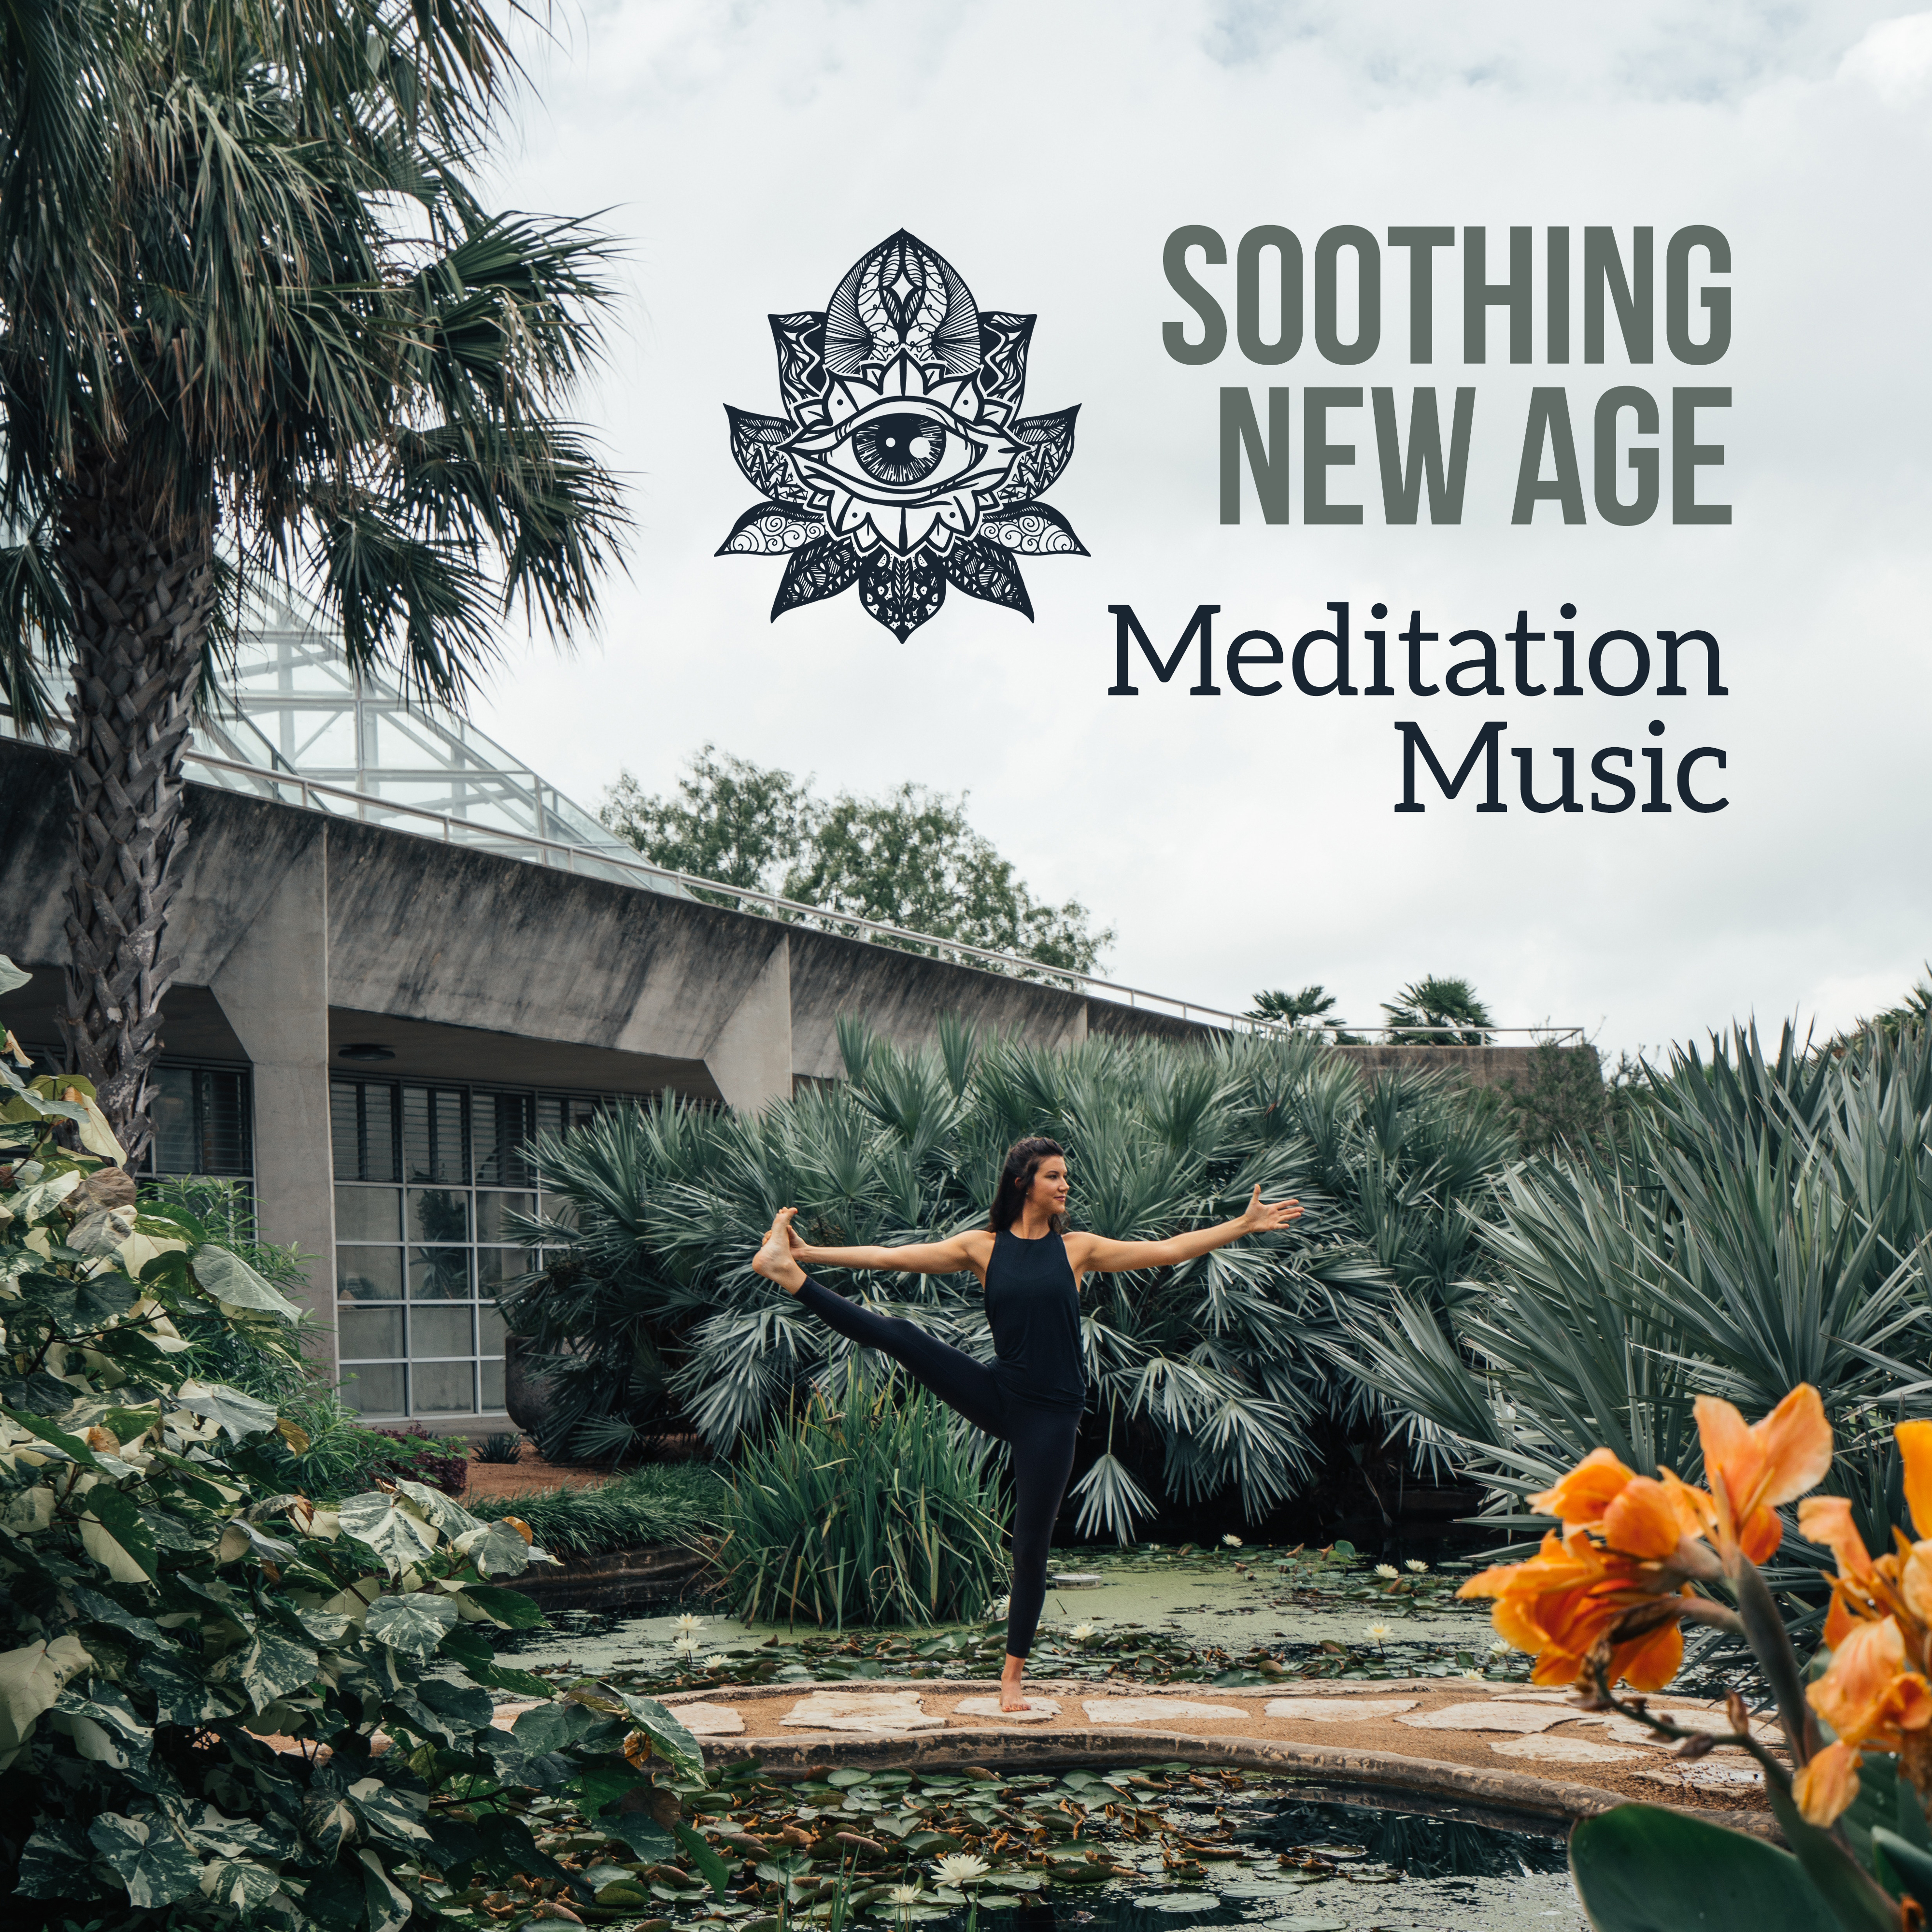 Soothing New Age Meditation Music Compilation